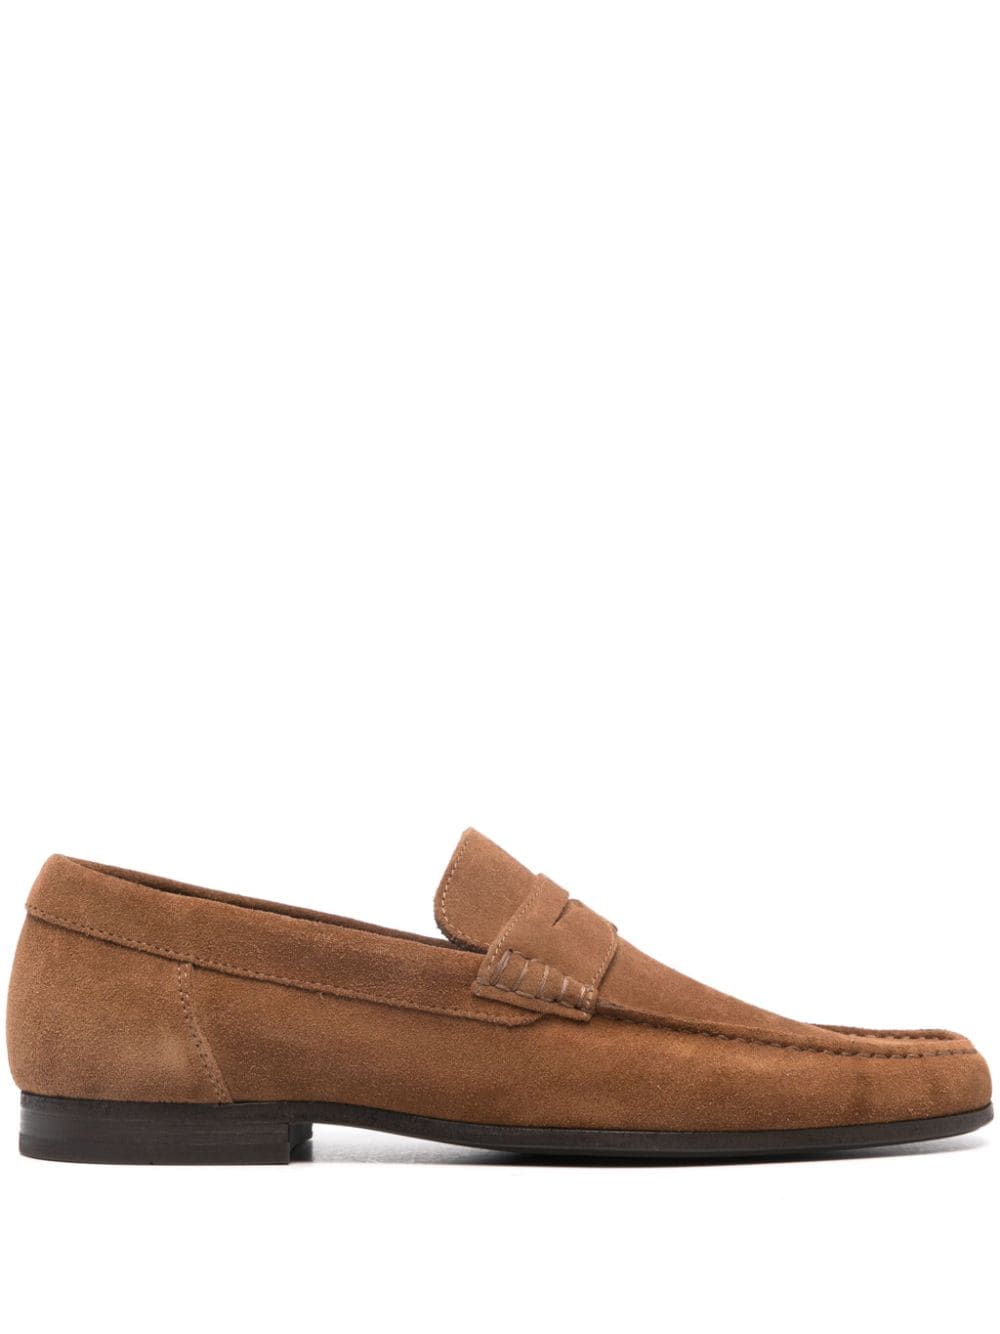 Casetti suede loafers